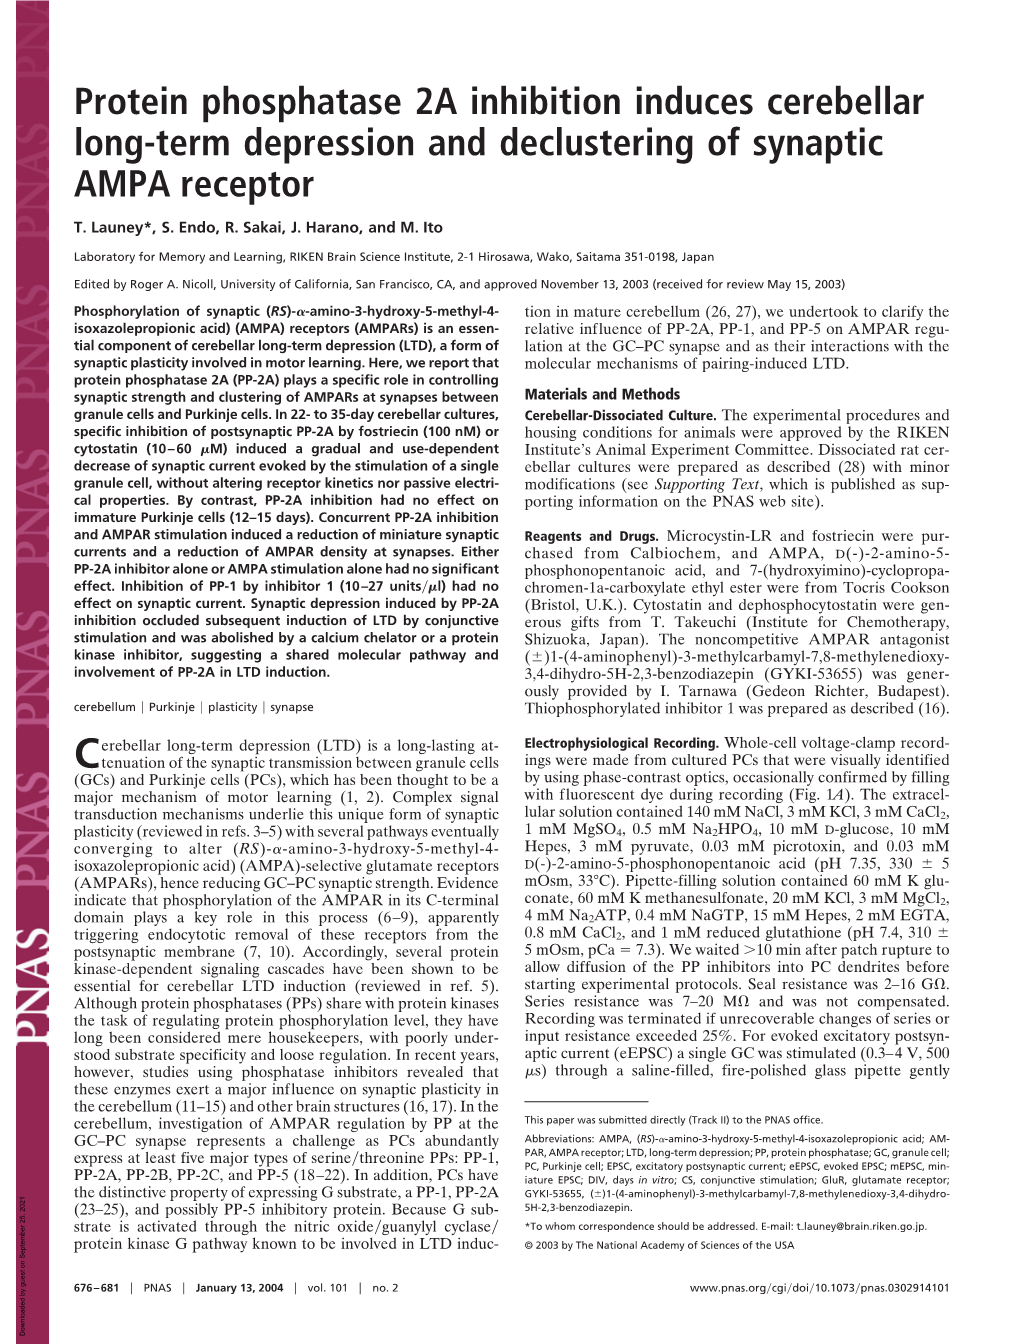 Protein Phosphatase 2A Inhibition Induces Cerebellar Long-Term Depression and Declustering of Synaptic AMPA Receptor